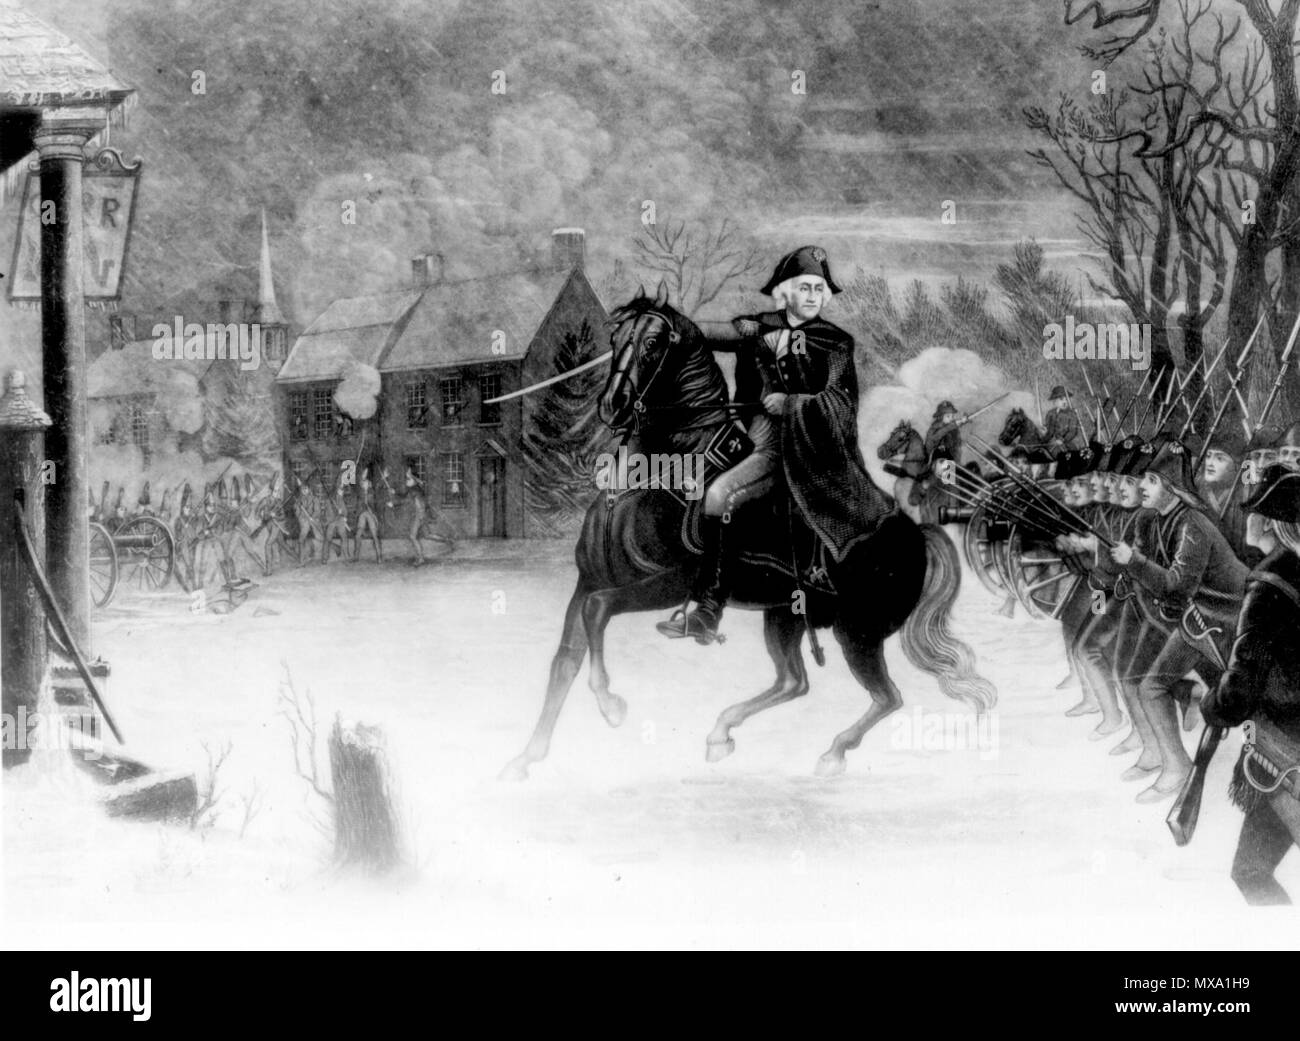 . Washington at the Battle of Trenton. An engraving by Illman Brothers. From painting by E.L. Henry. 1870. Illman Brothers from painting by   Edward Lamson Henry  (1841–1919)    Alternative names E. L. Henry; Edward Henry; Edward Lawson Henry; Eduard Lamson Henry; E.L. Henry; henry edward lamson; Henry  Description American painter  Date of birth/death 12 January 1841 9 May 1919  Location of birth Charleston  Authority control  : Q2605527 VIAF: 812204 ISNI: 0000 0000 8080 6389 ULAN: 500006188 LCCN: n87932413 NLA: 35755797 WorldCat 275 Henry-revolutionary-war Stock Photo